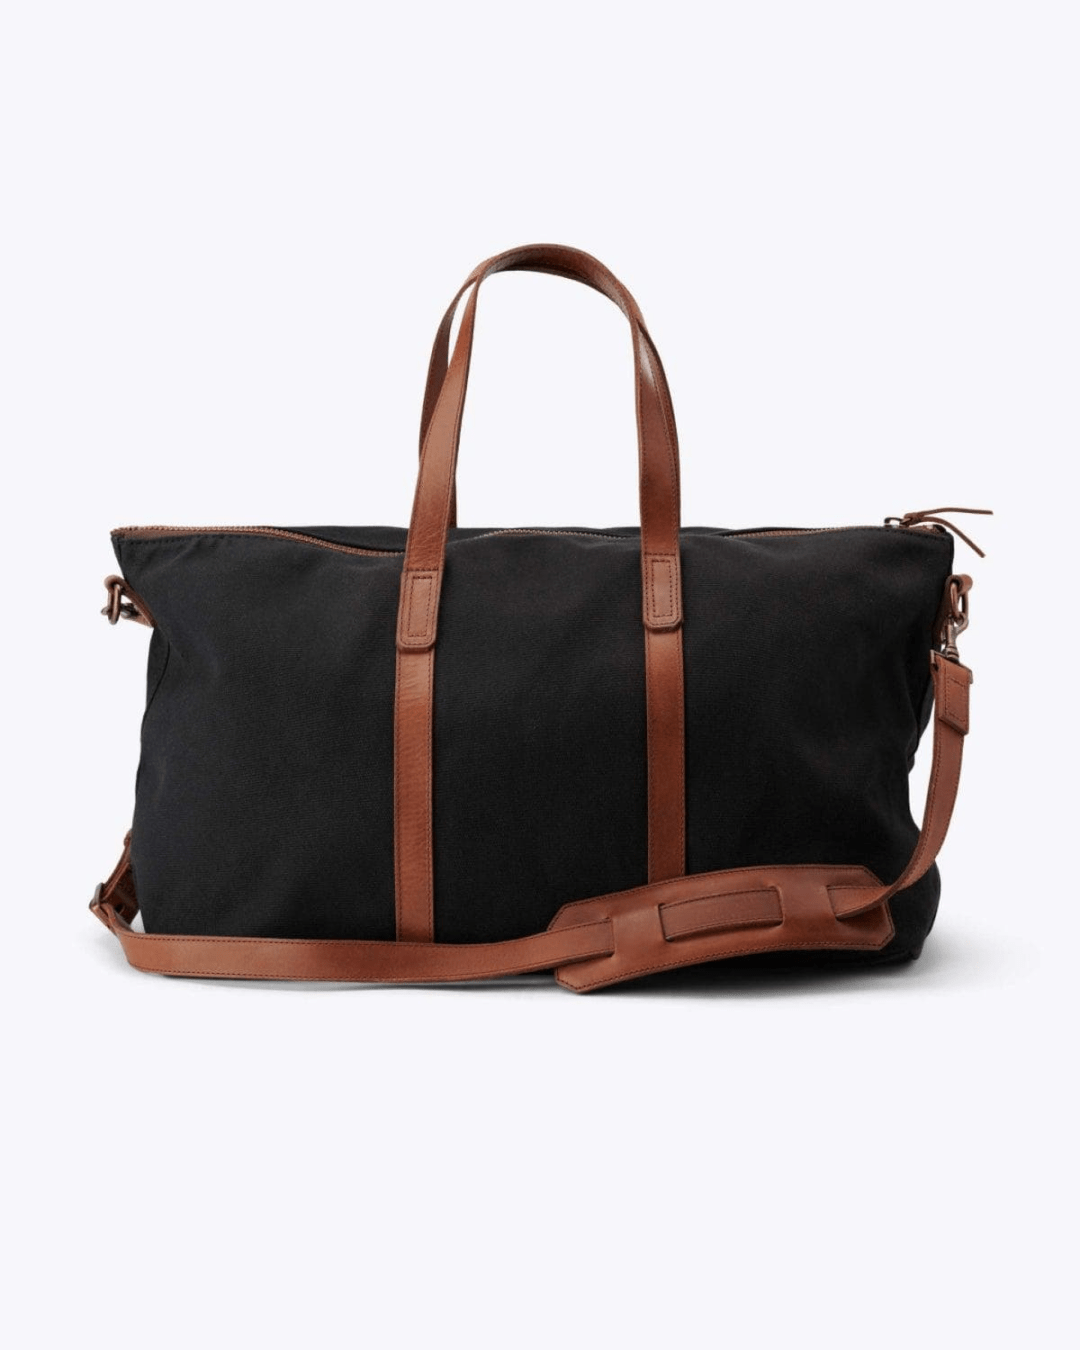 Lifestyle - Bags